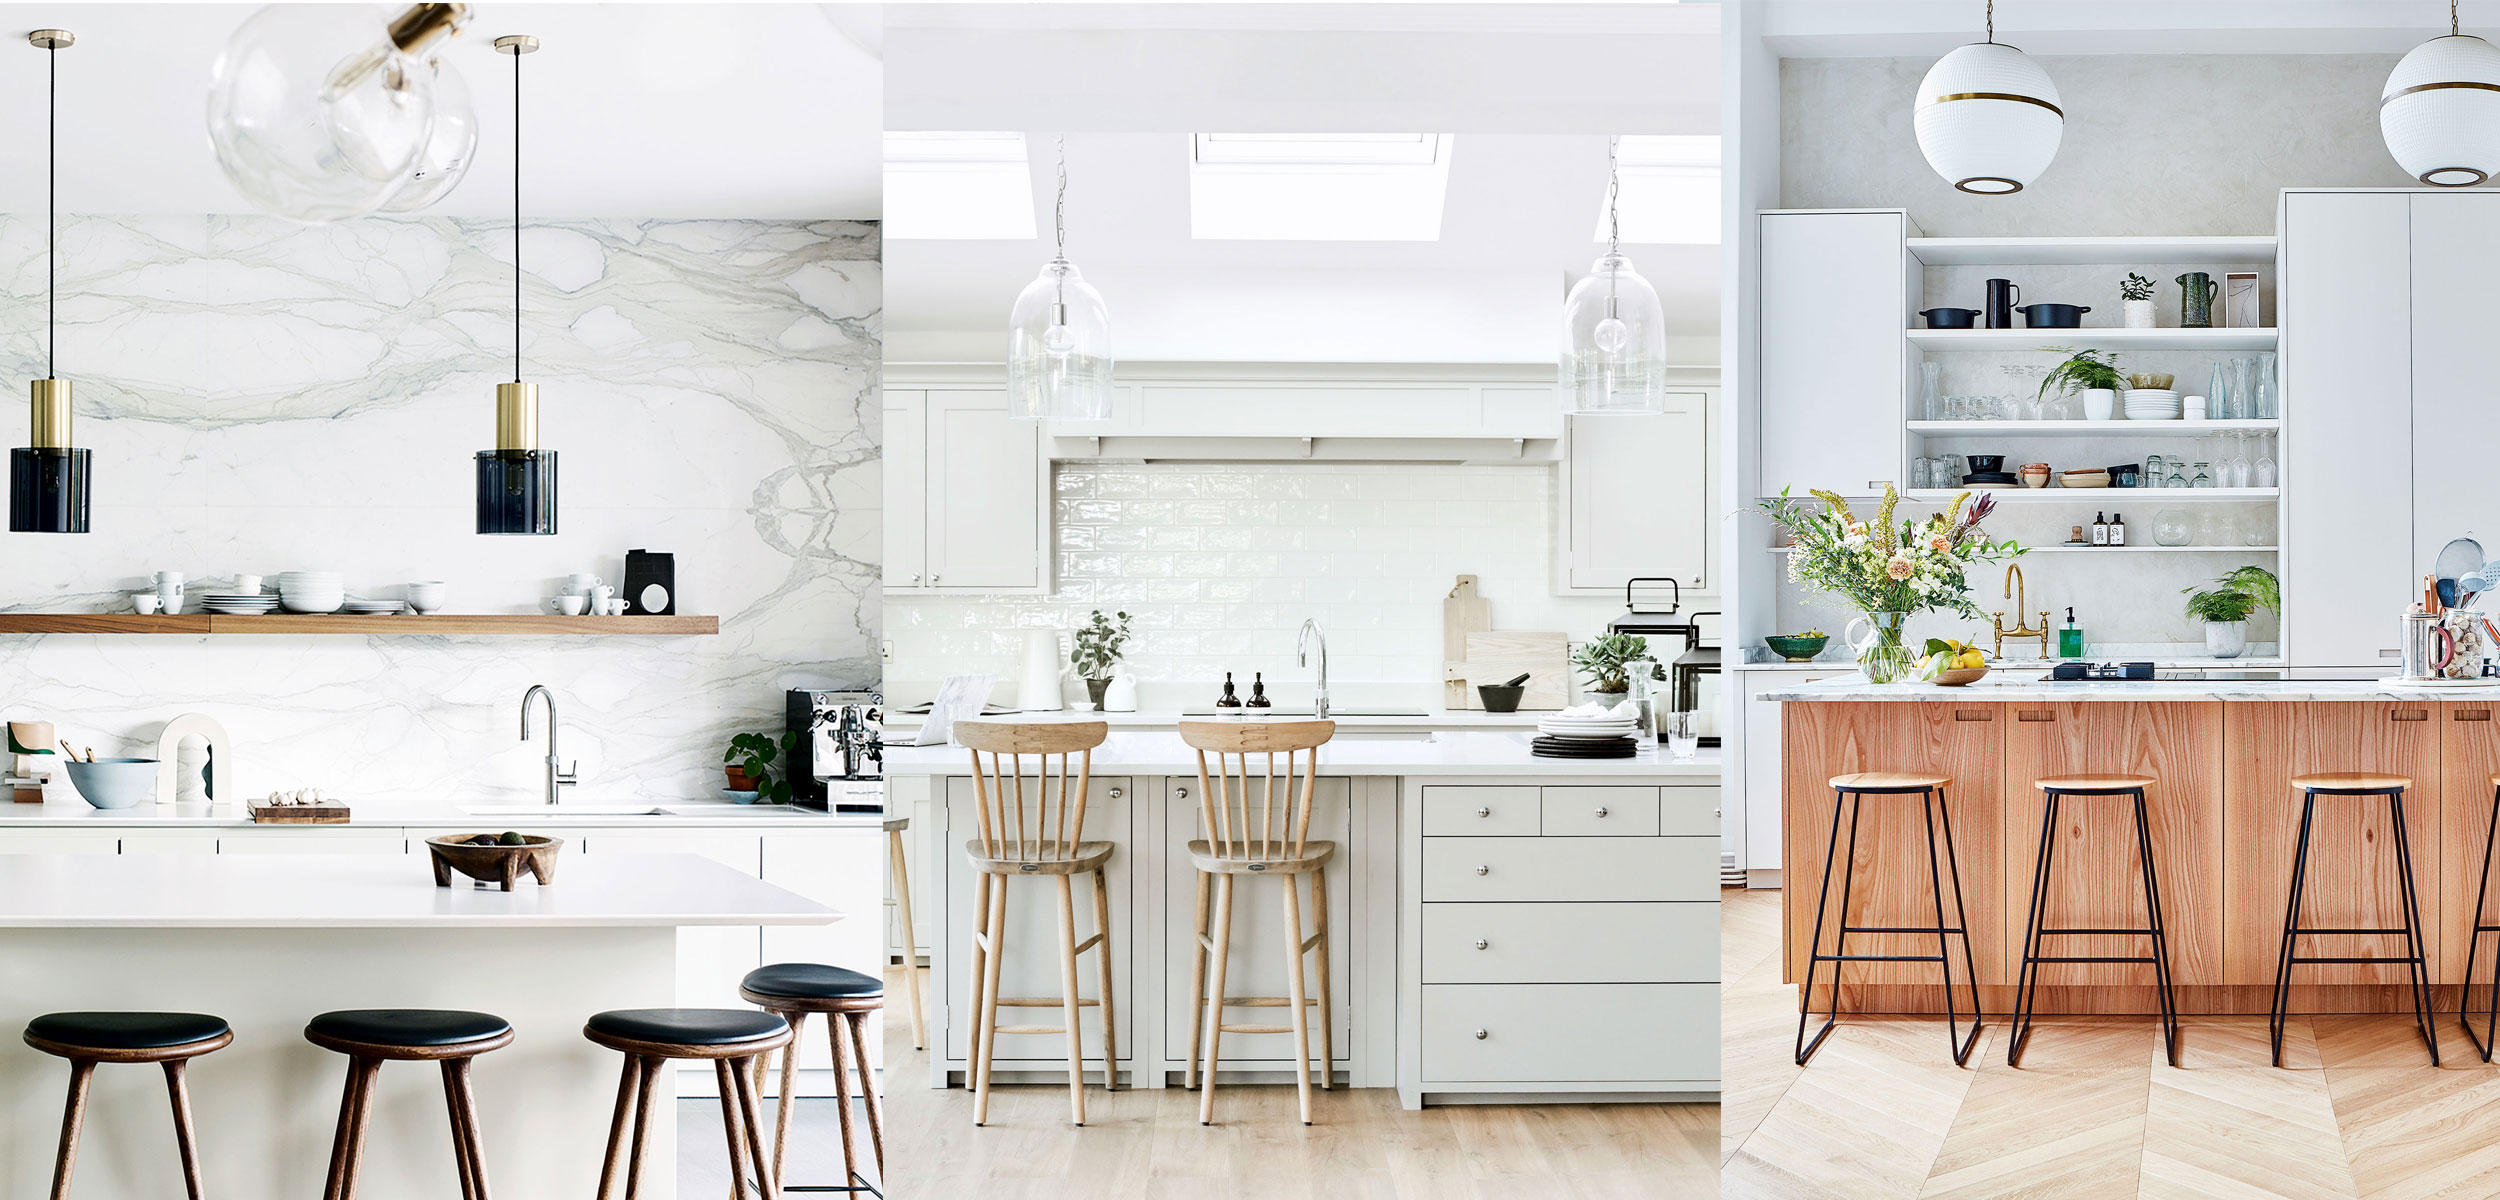 White kitchen ideas 18 ways to use this favorite shade   Homes ...